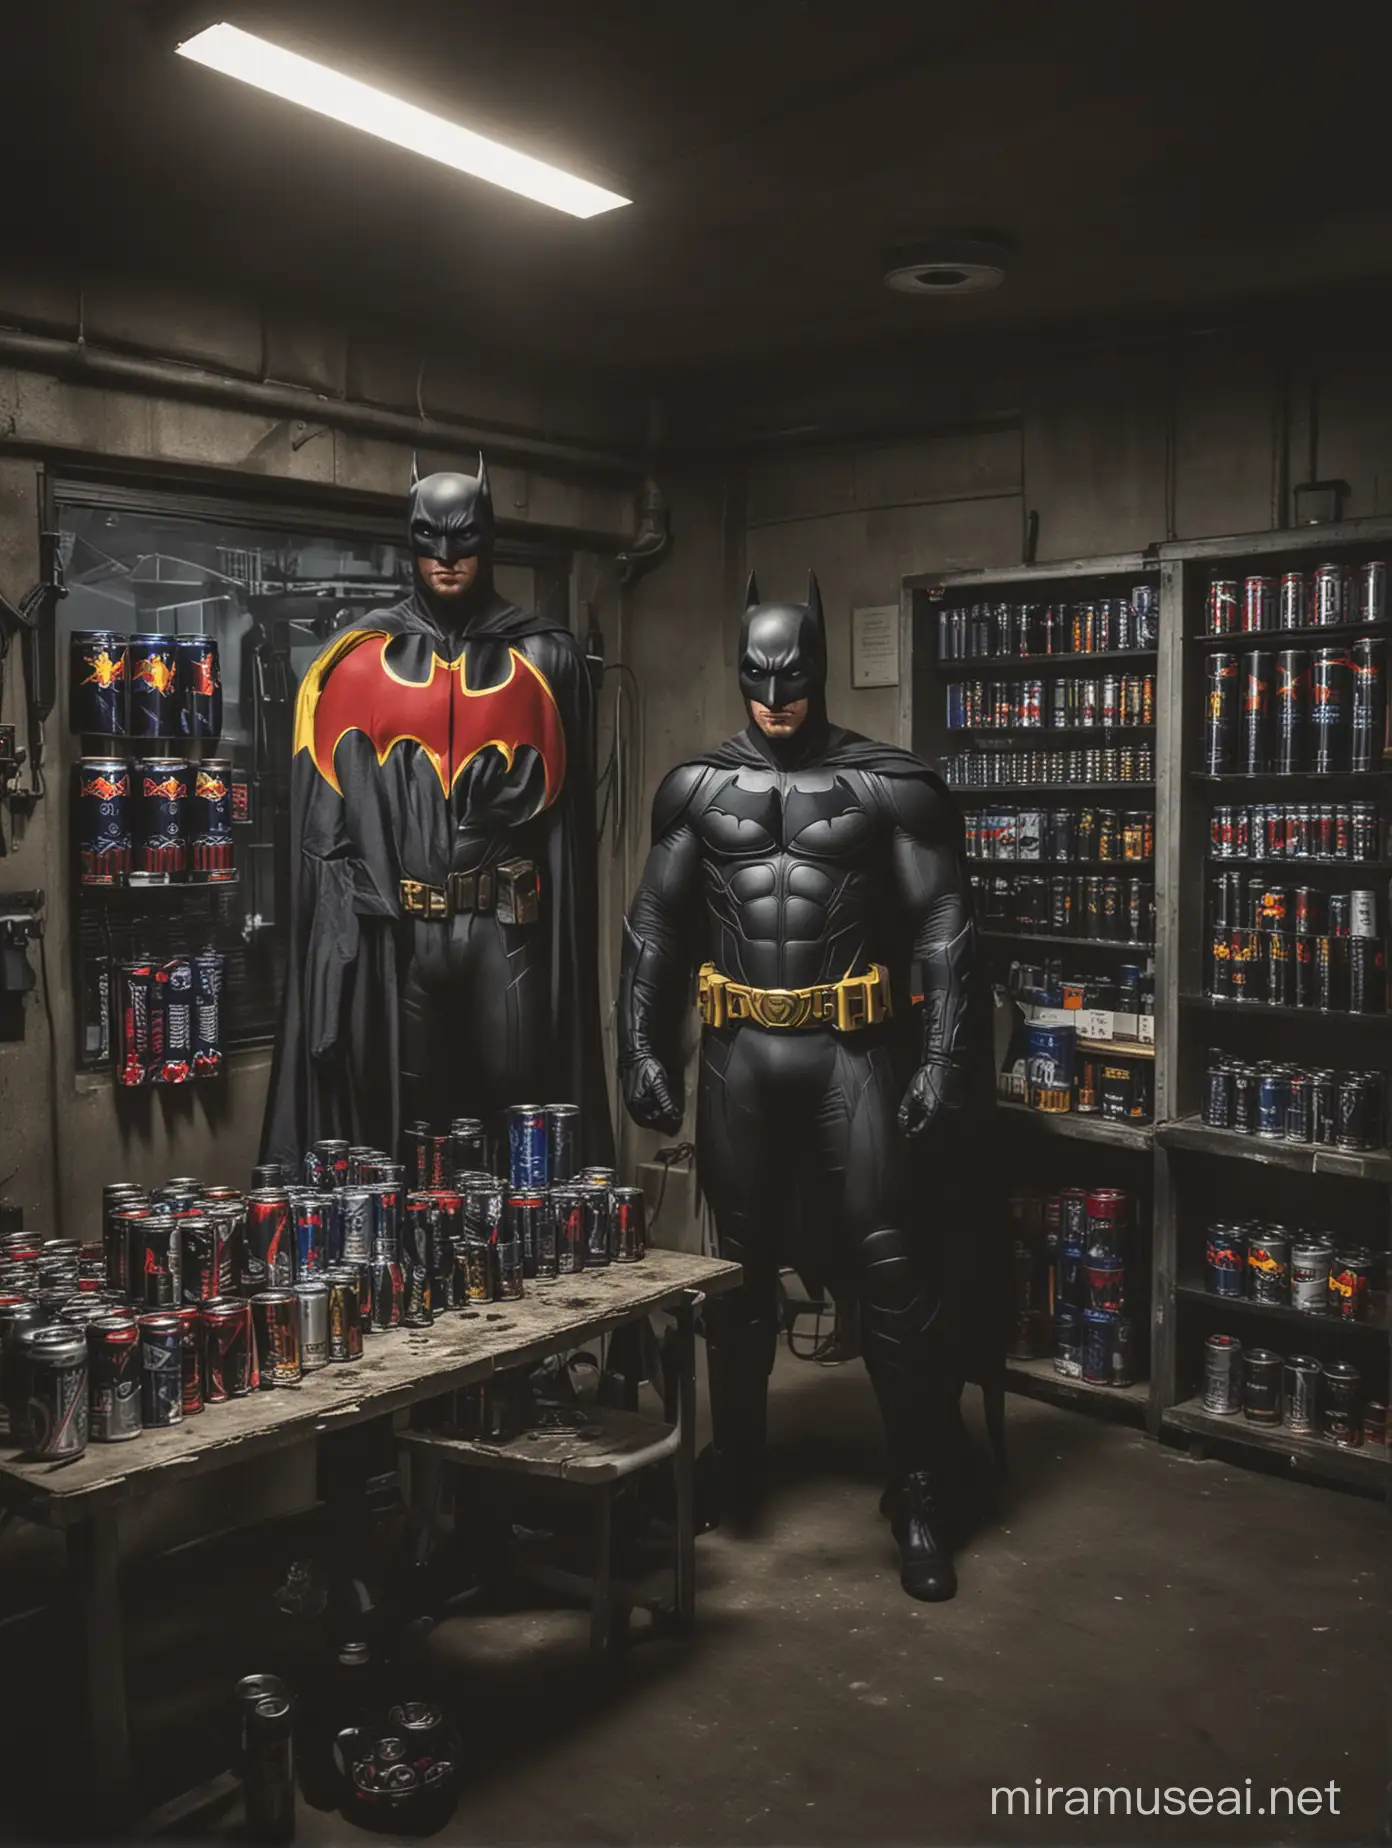 Batman Drinking Red Bull in the Batcave